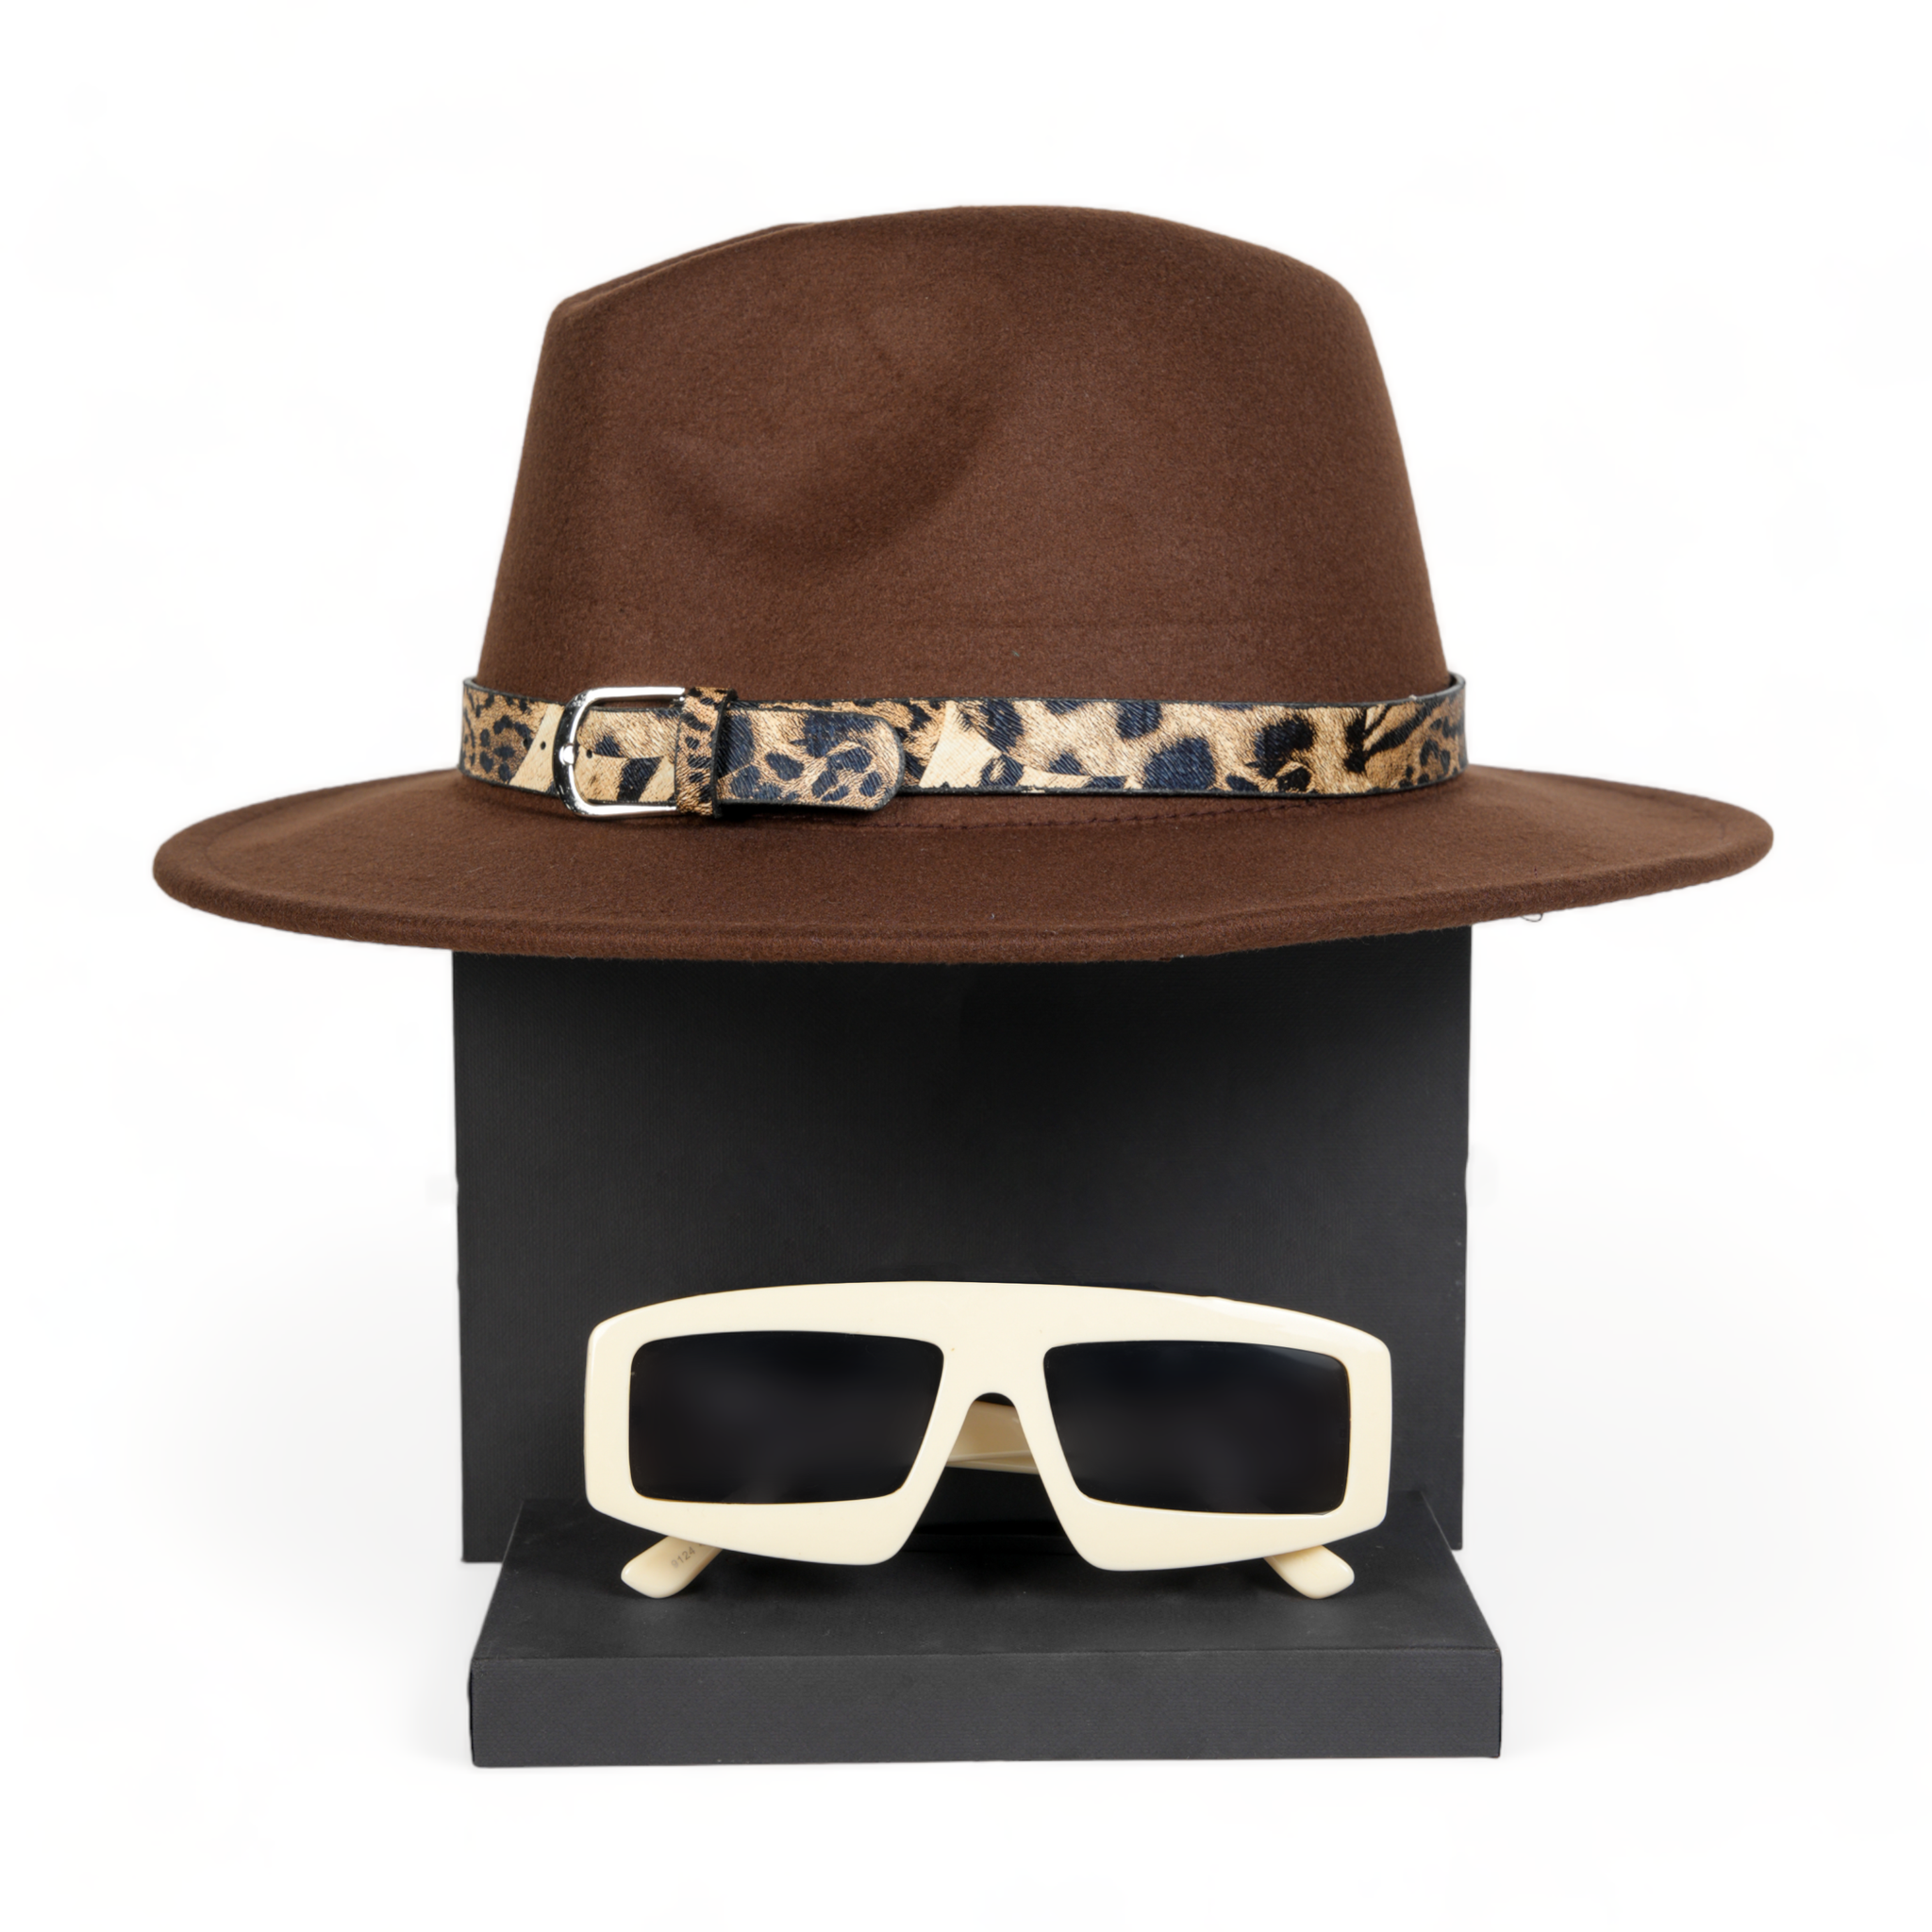 Chokore Special 2-in-1 Gift Set for Her (Fedora Hat & Sunglasses)